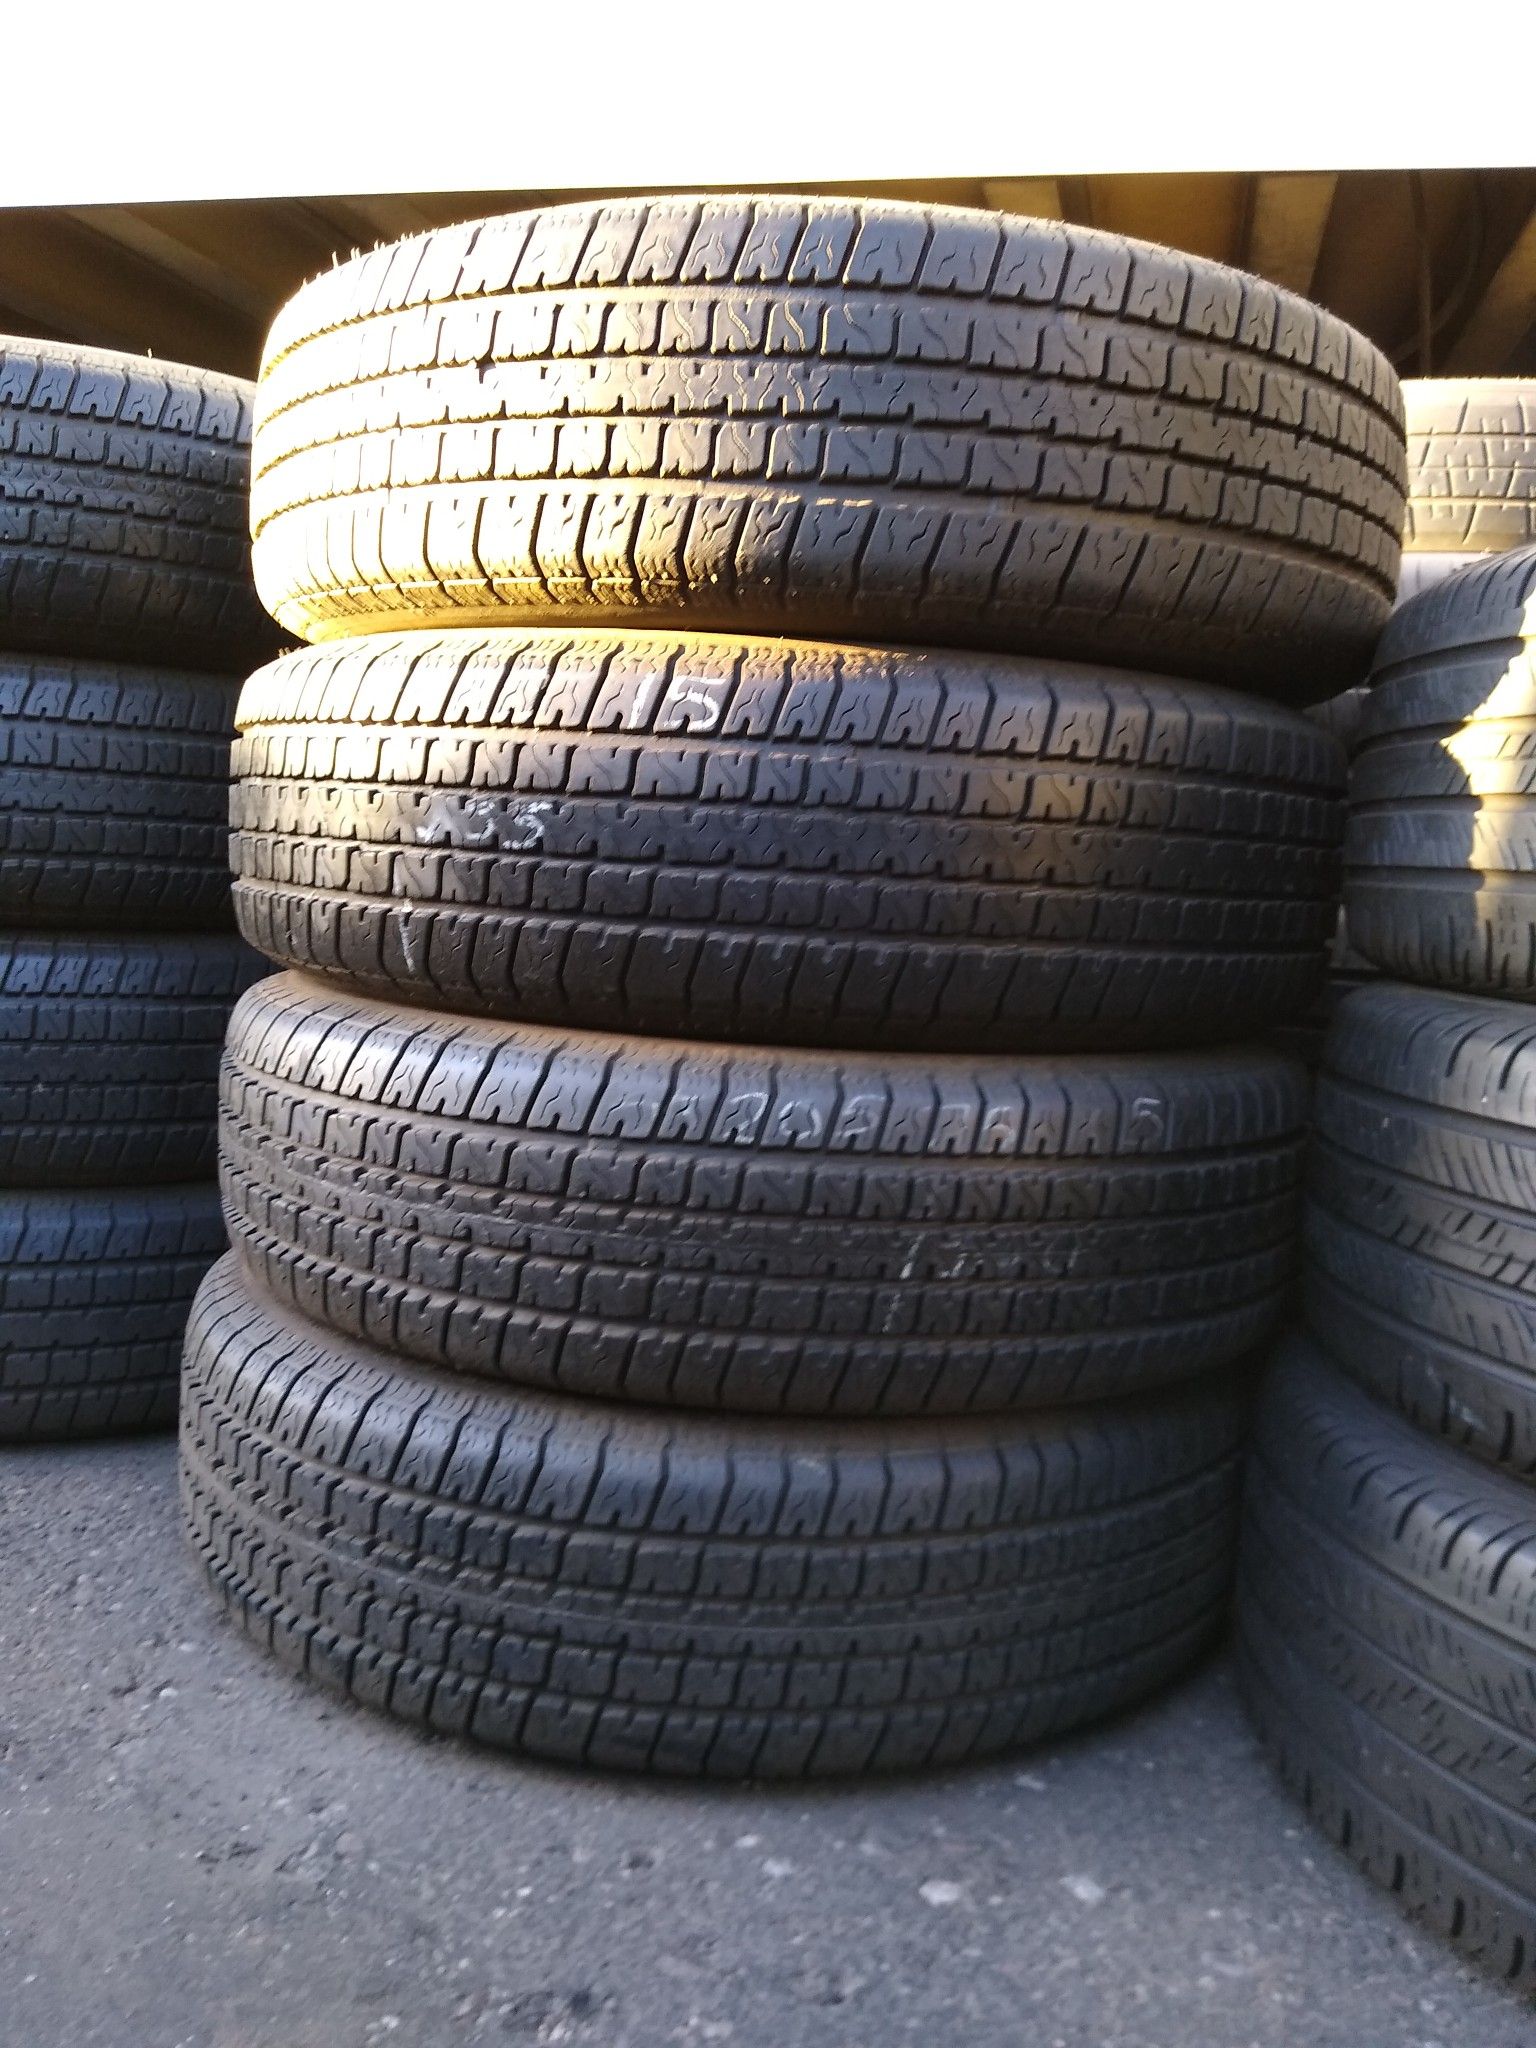 #4/ selling 4 used trailer tires size 205 75 15 all 4 for $120 Free installation